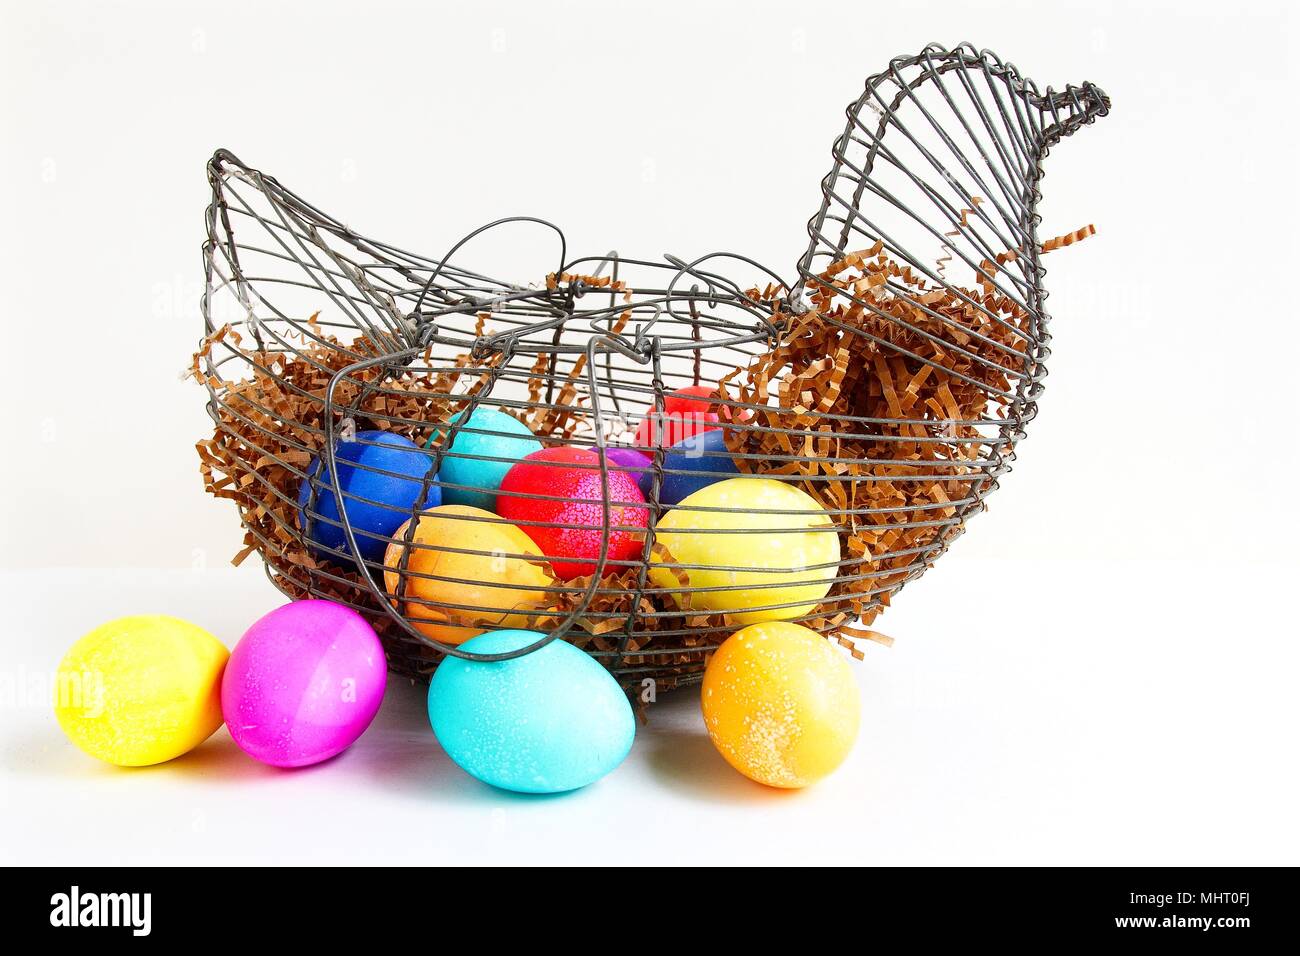 Colored eggs in a wire chicken basket, isolated on a white background Stock Photo